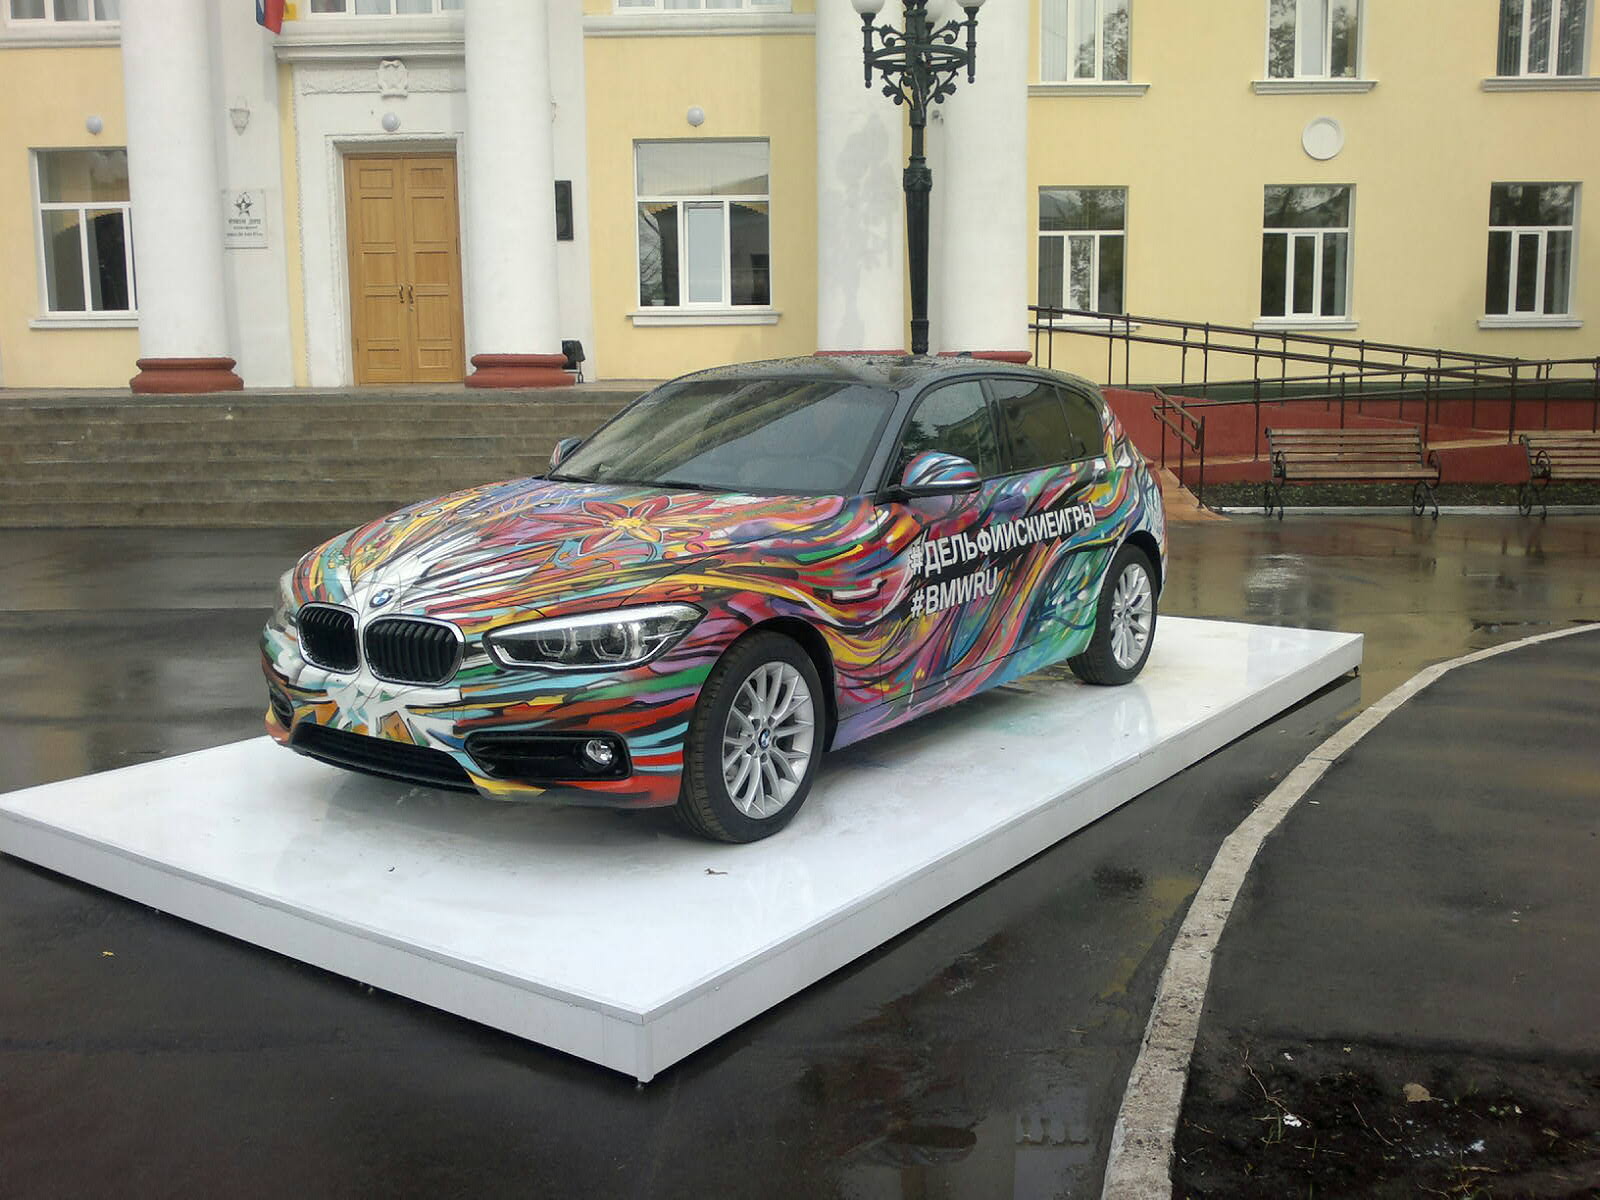 Participants and guests of the Cultural Project Delphic Orel  2015 created an art object on the basis of a BMW car, specially brought by the company to the Delphic Games